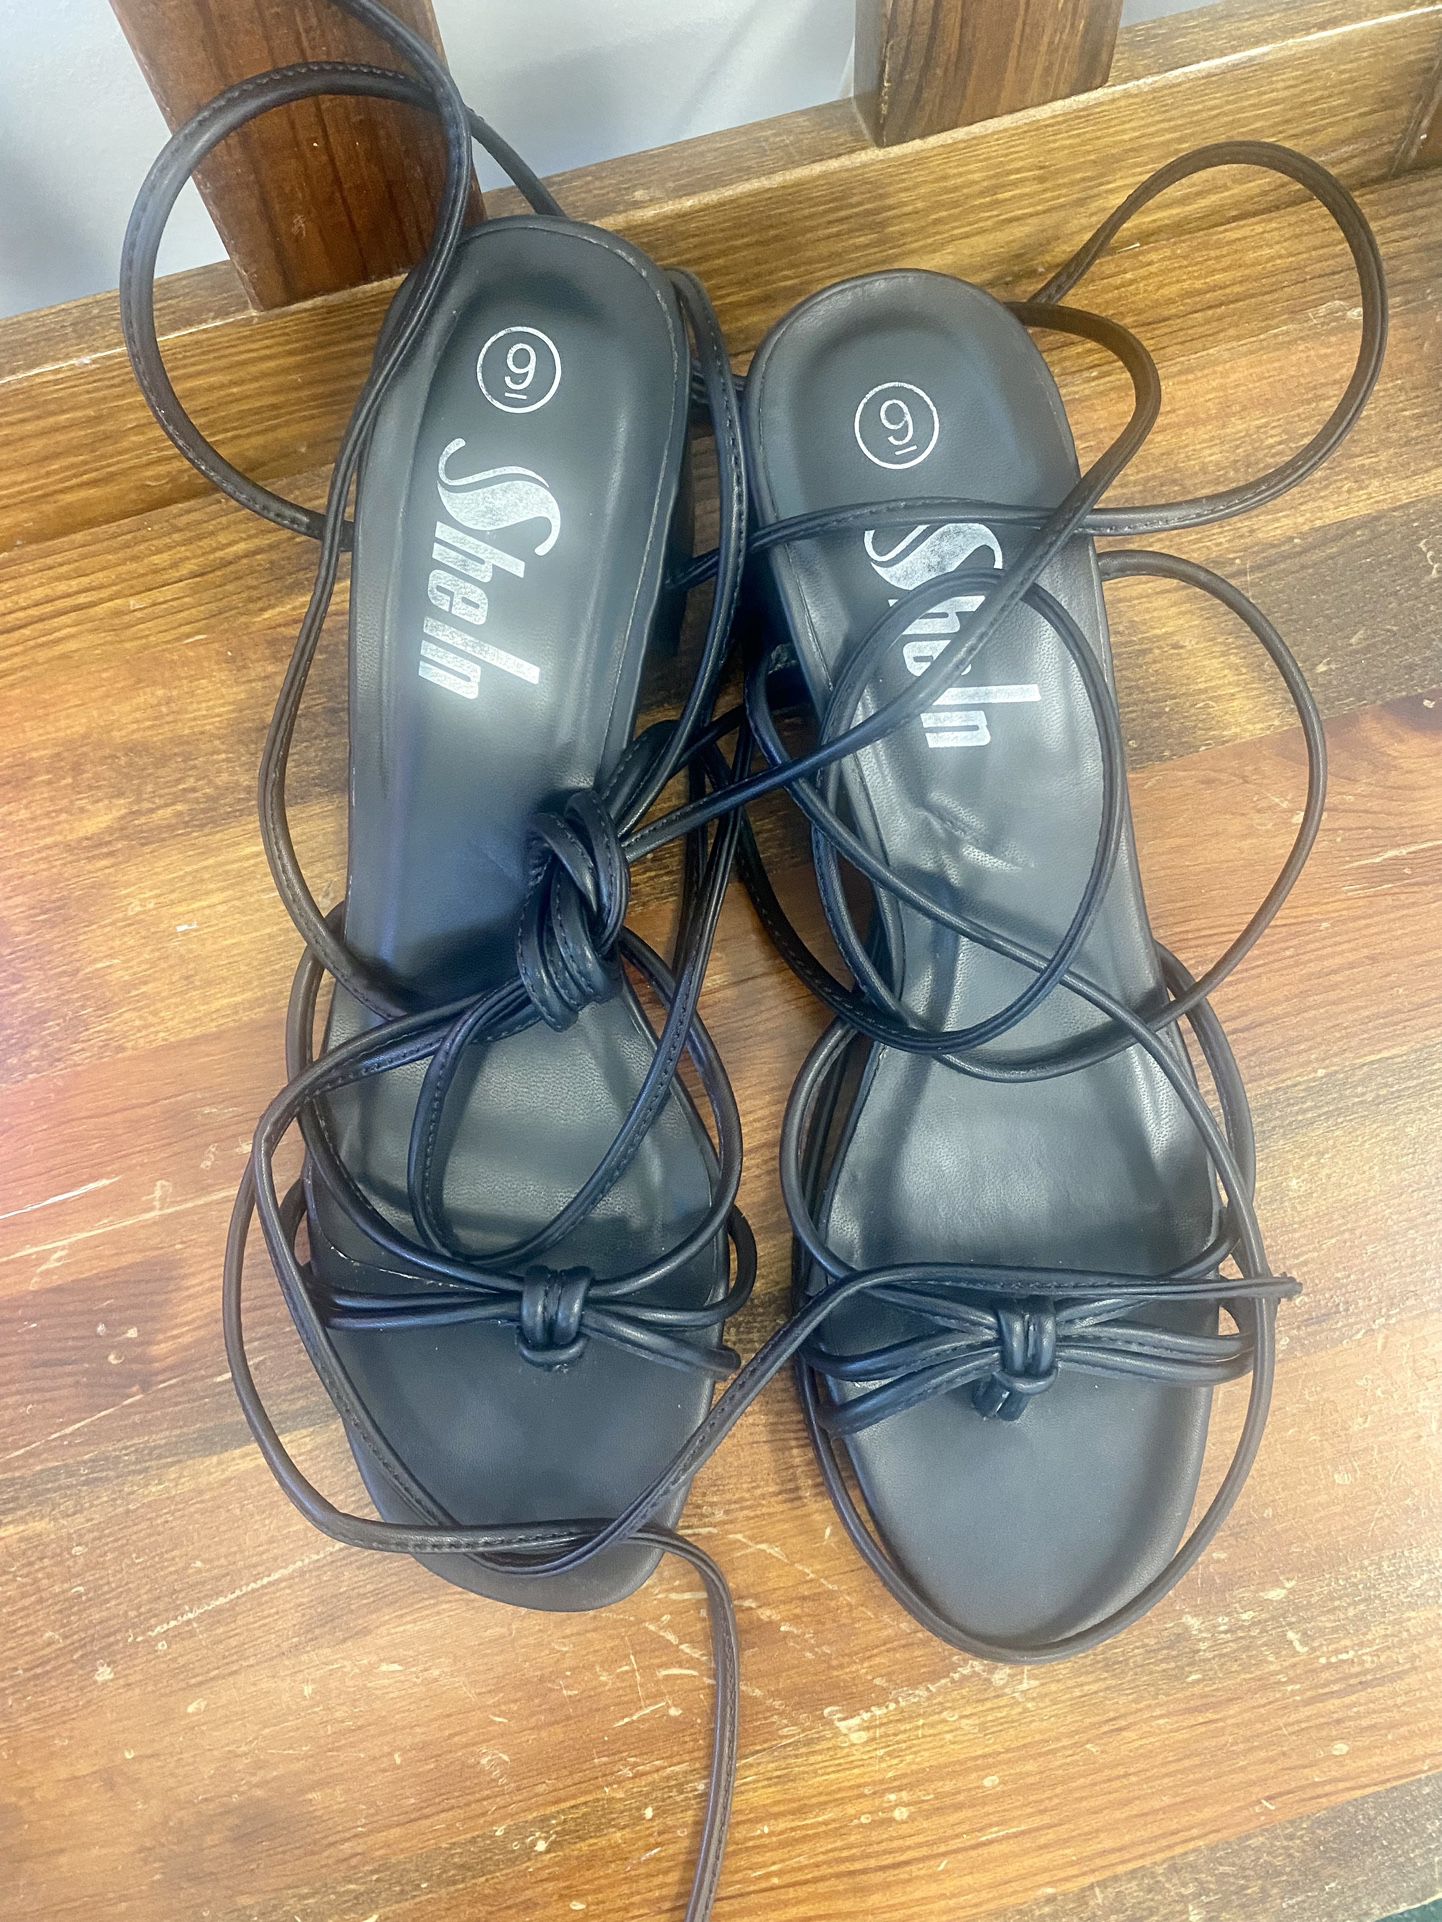 Super Strappy Black Sandals with Chunky Heel Size 9